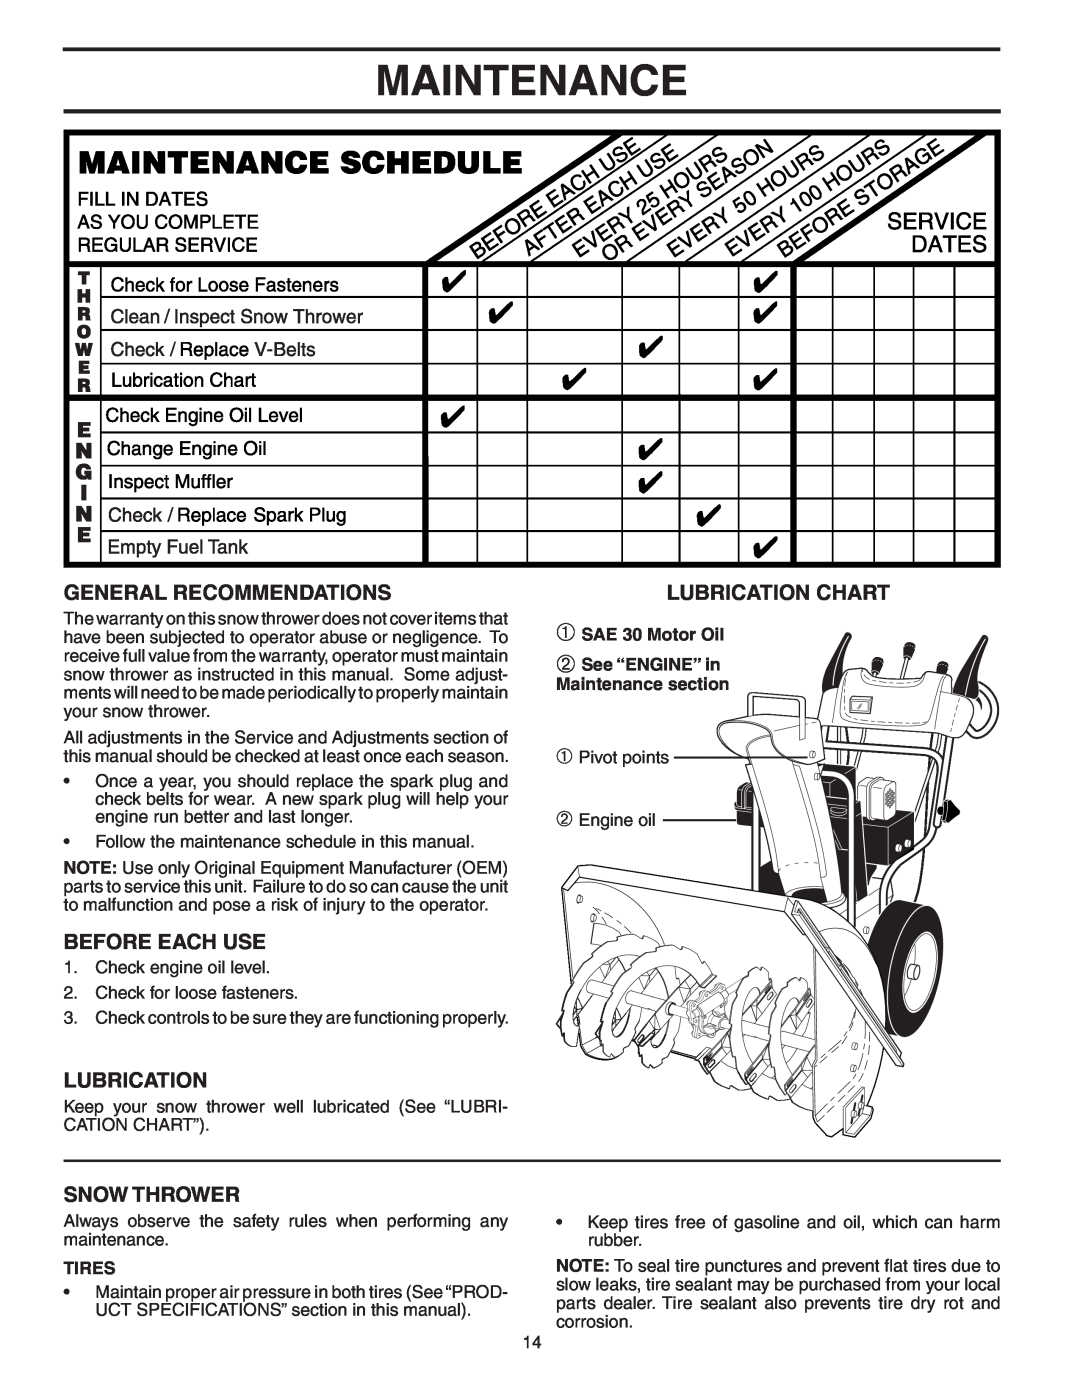 Poulan PP1130SB, 187883 Maintenance, General Recommendations, Before Each Use, Snow Thrower, Lubrication Chart, Tires 